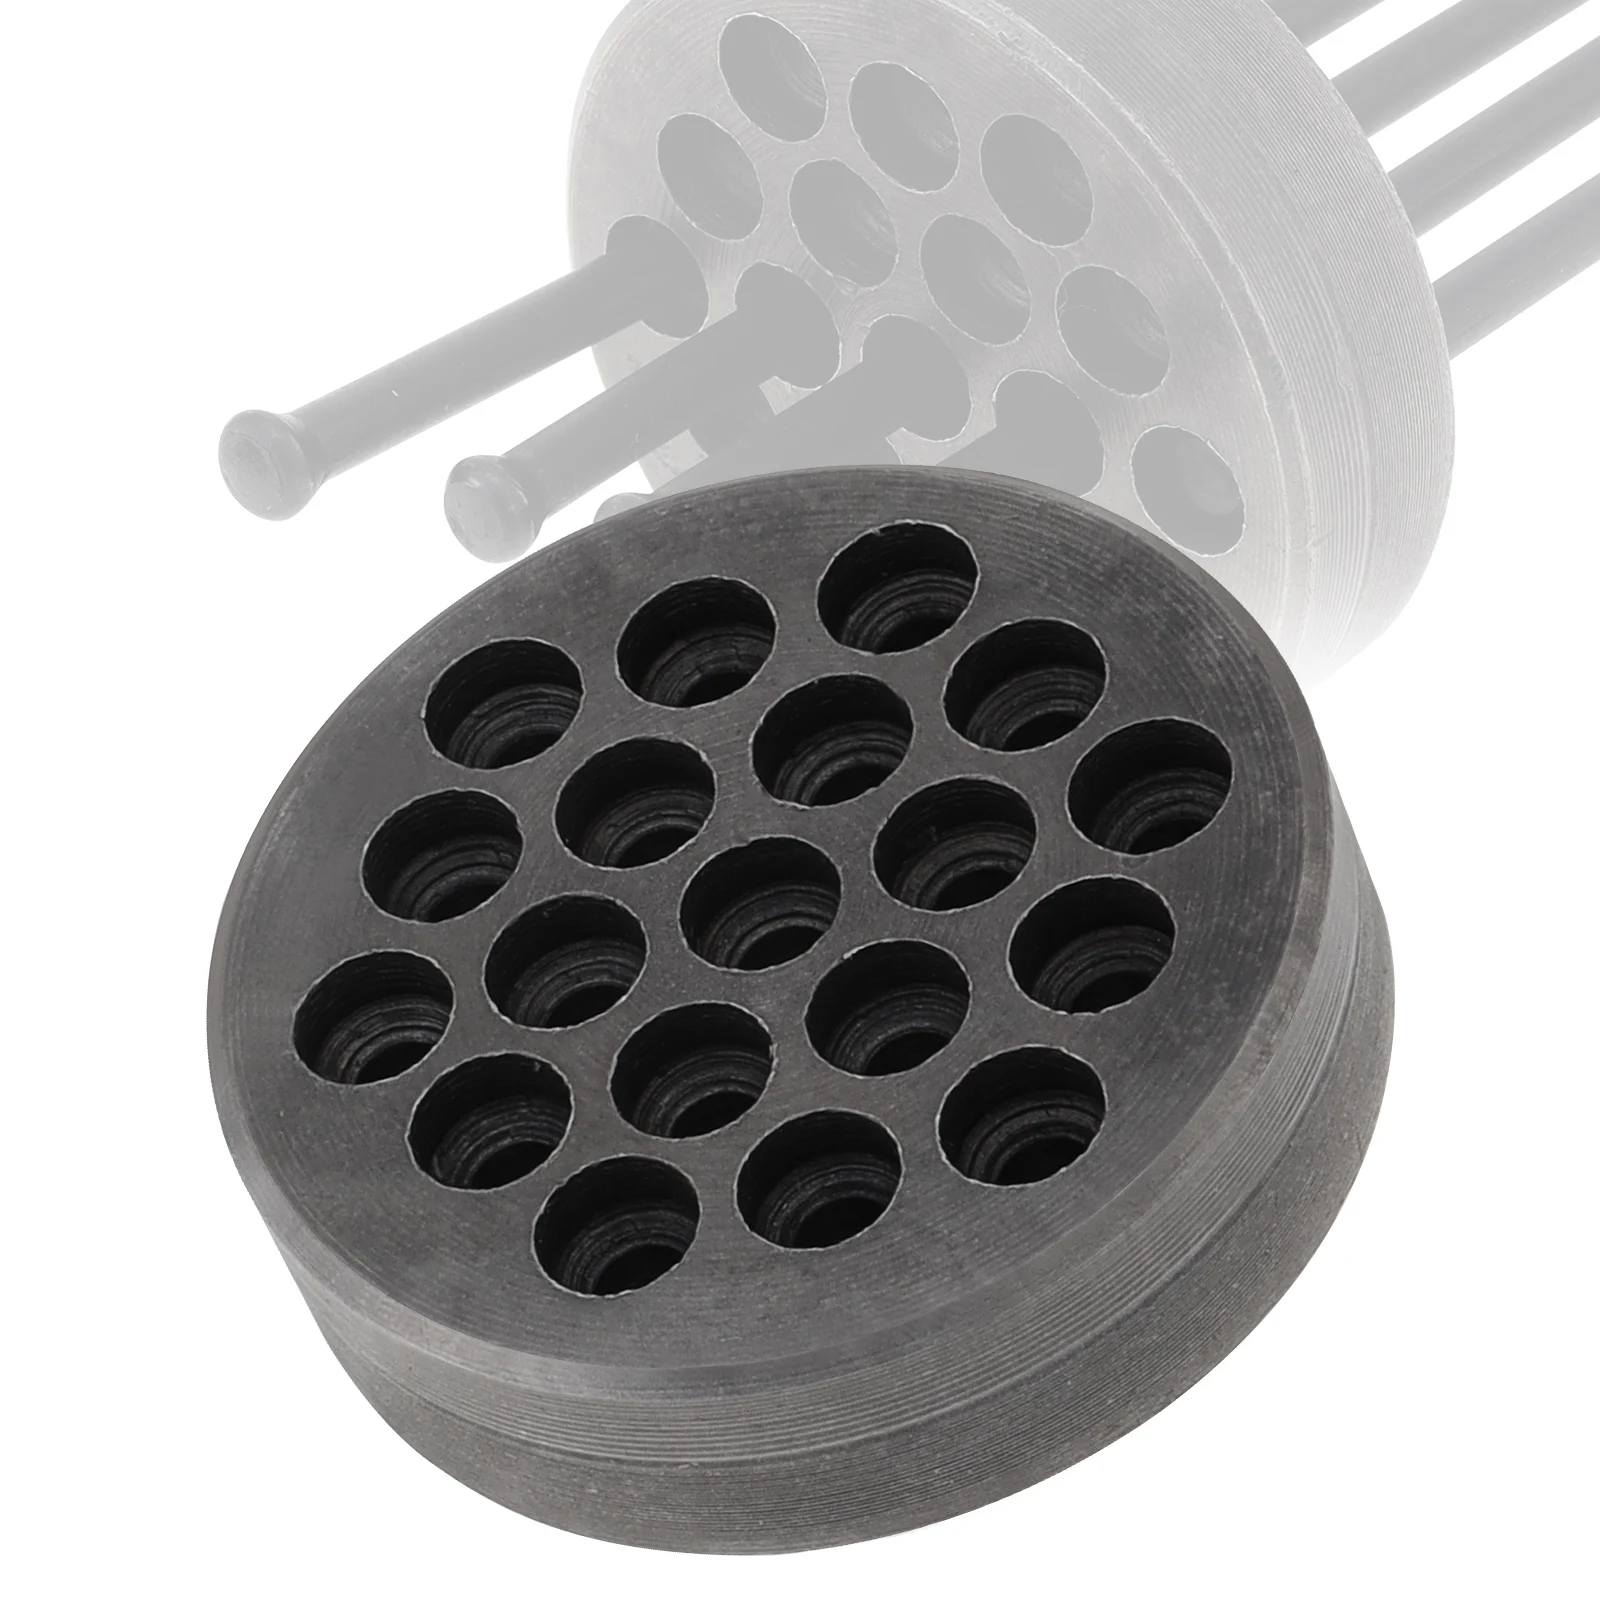 

Rust Removal Descaling Needles Base Honeycomb Shaped Support Base for Needle Scaler / Pneumatic Rust Removal Tool